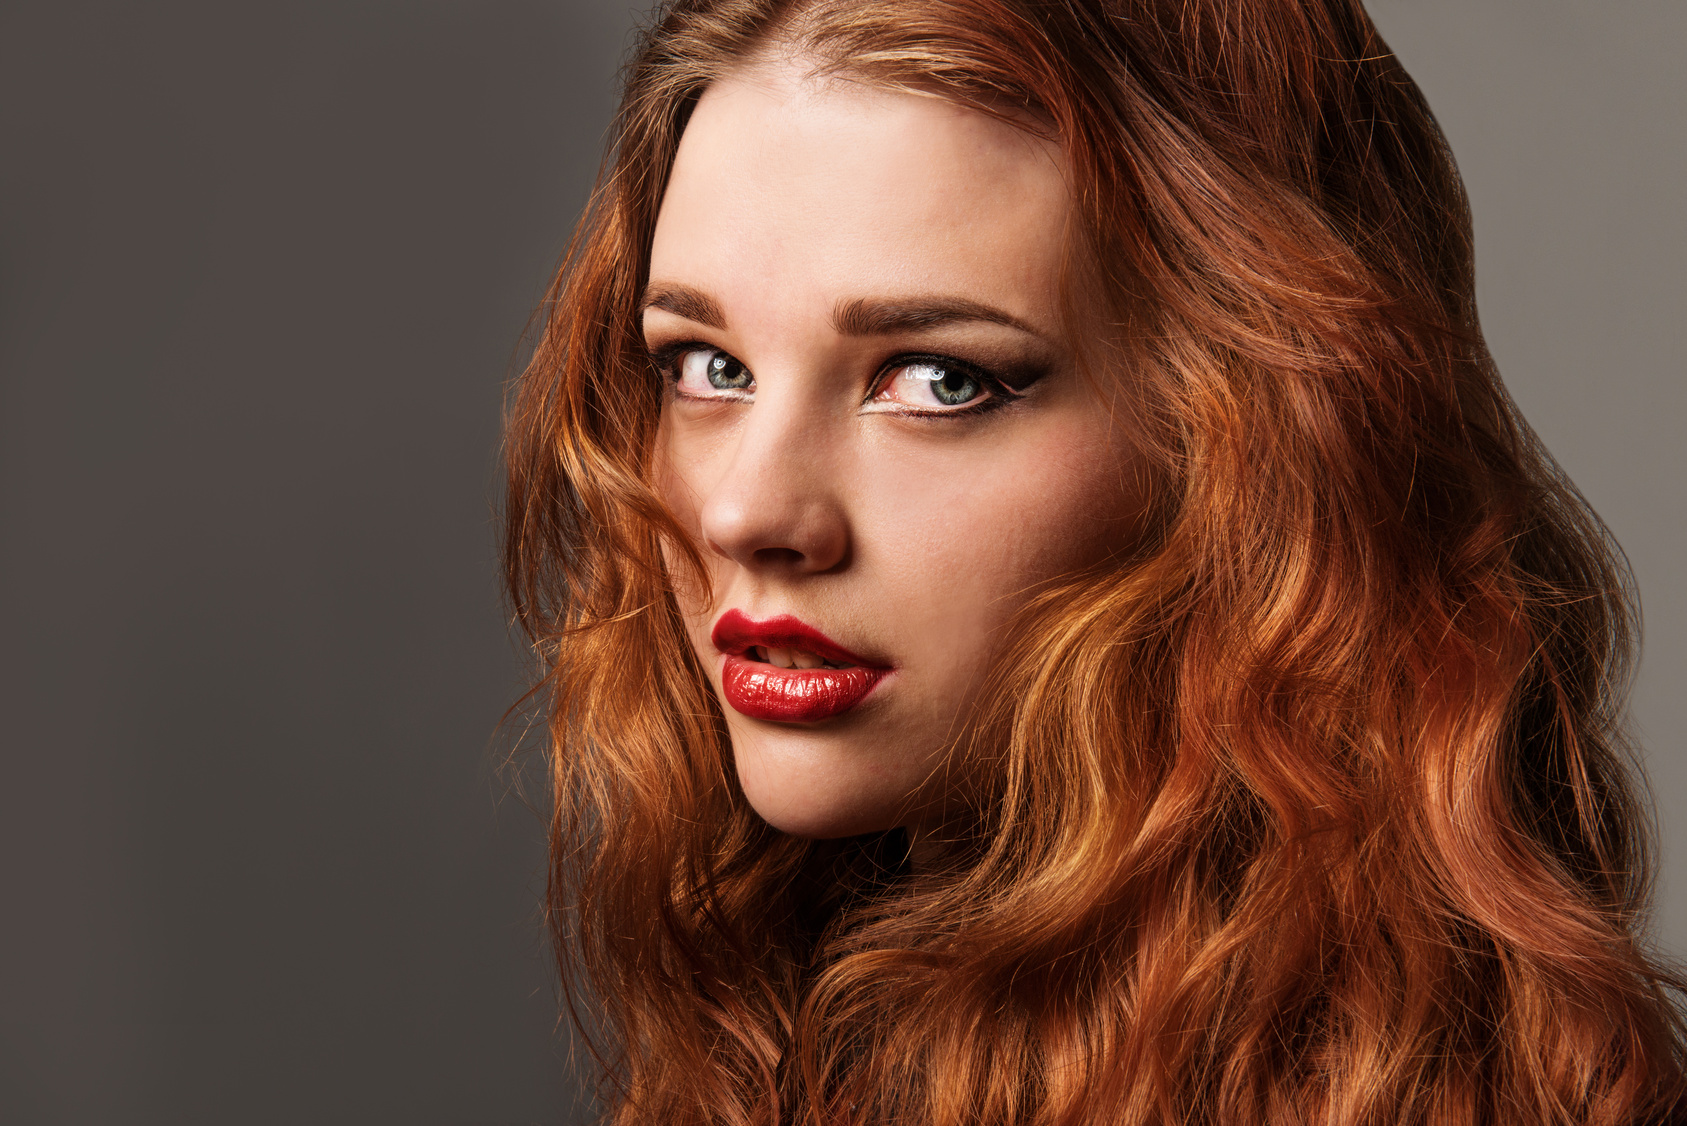 Long Curly Red Hair. Fashion Woman Portrait.